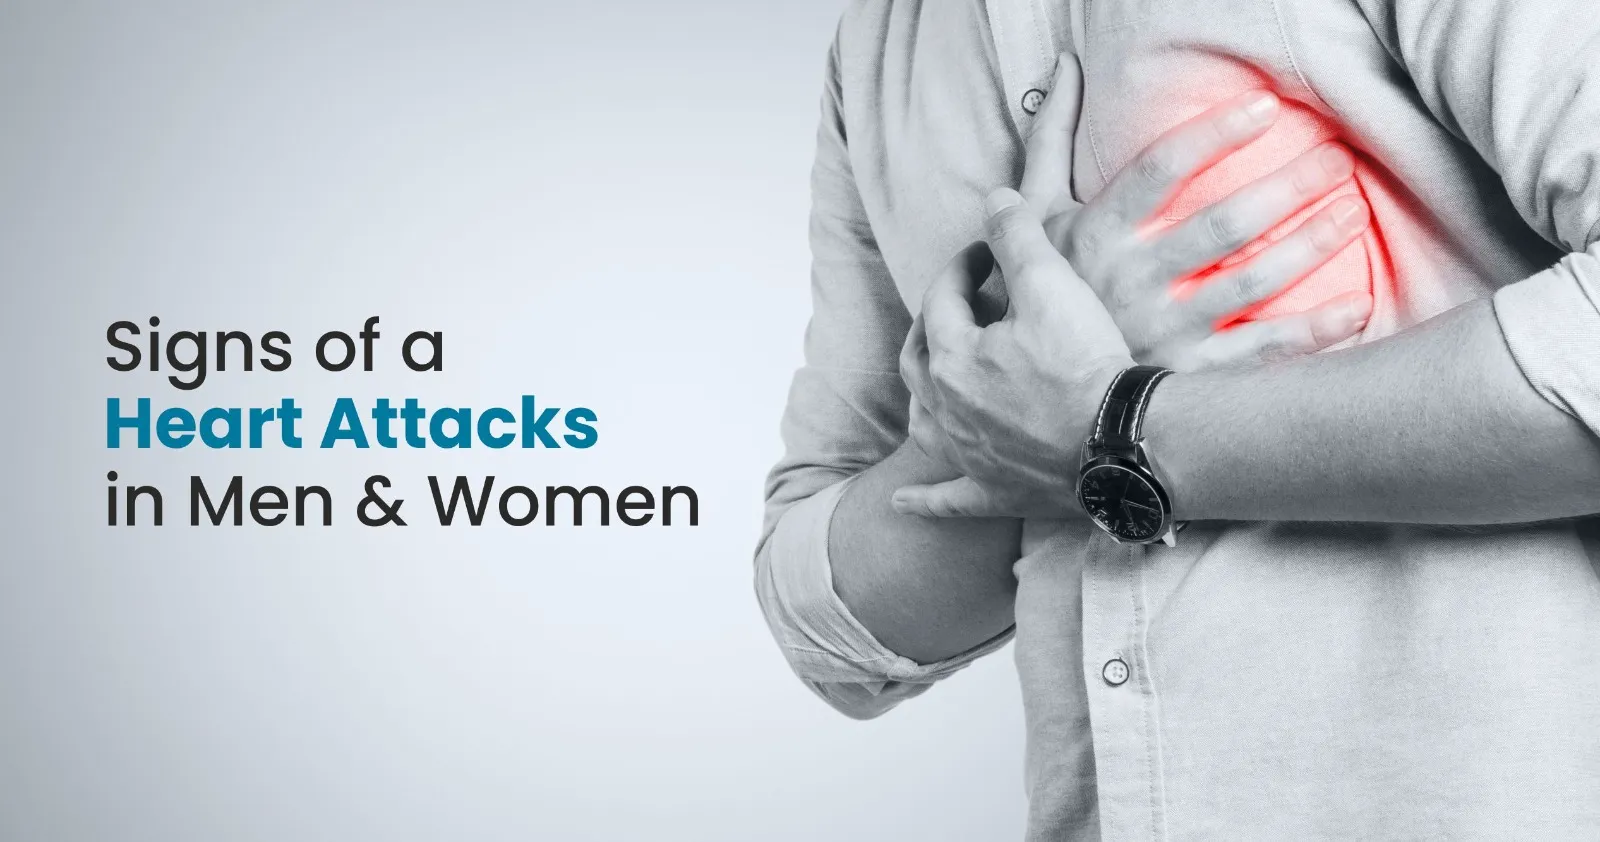 Women's heart attack symptoms can differ from men's: Know the